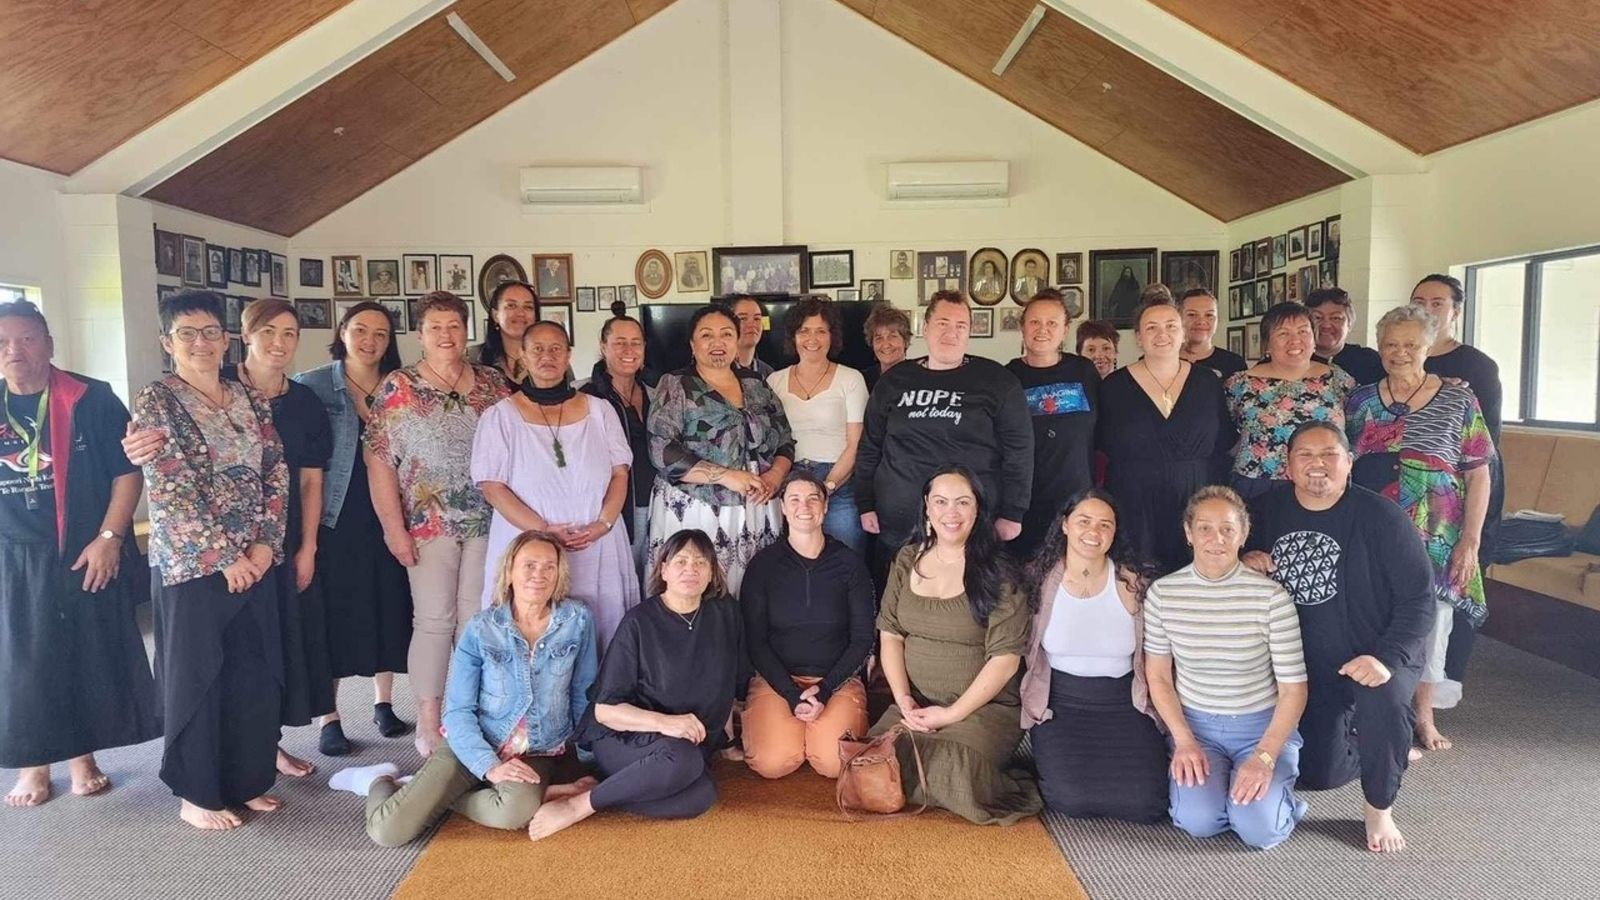 Maori Nurse Practitioners gathered at Waimanoni marae and posing for a group photo